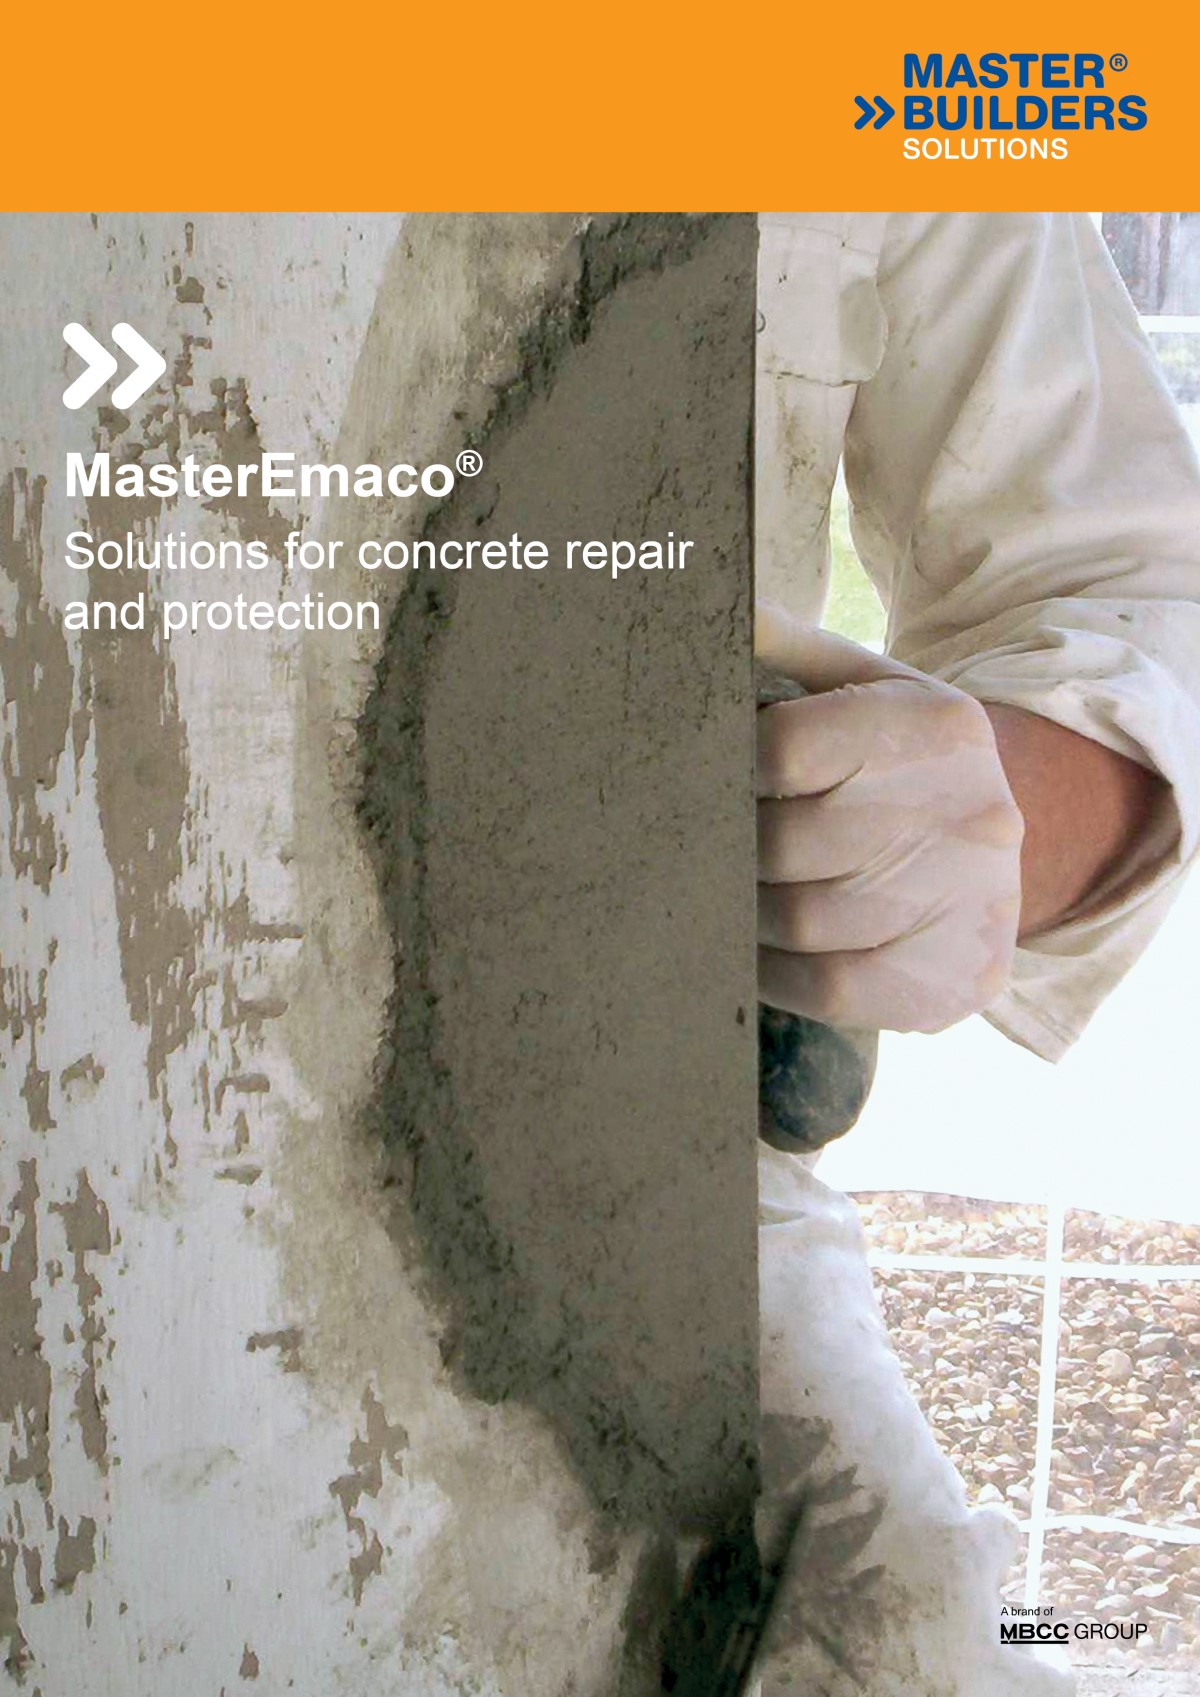 Download the MasterEmaco brochure